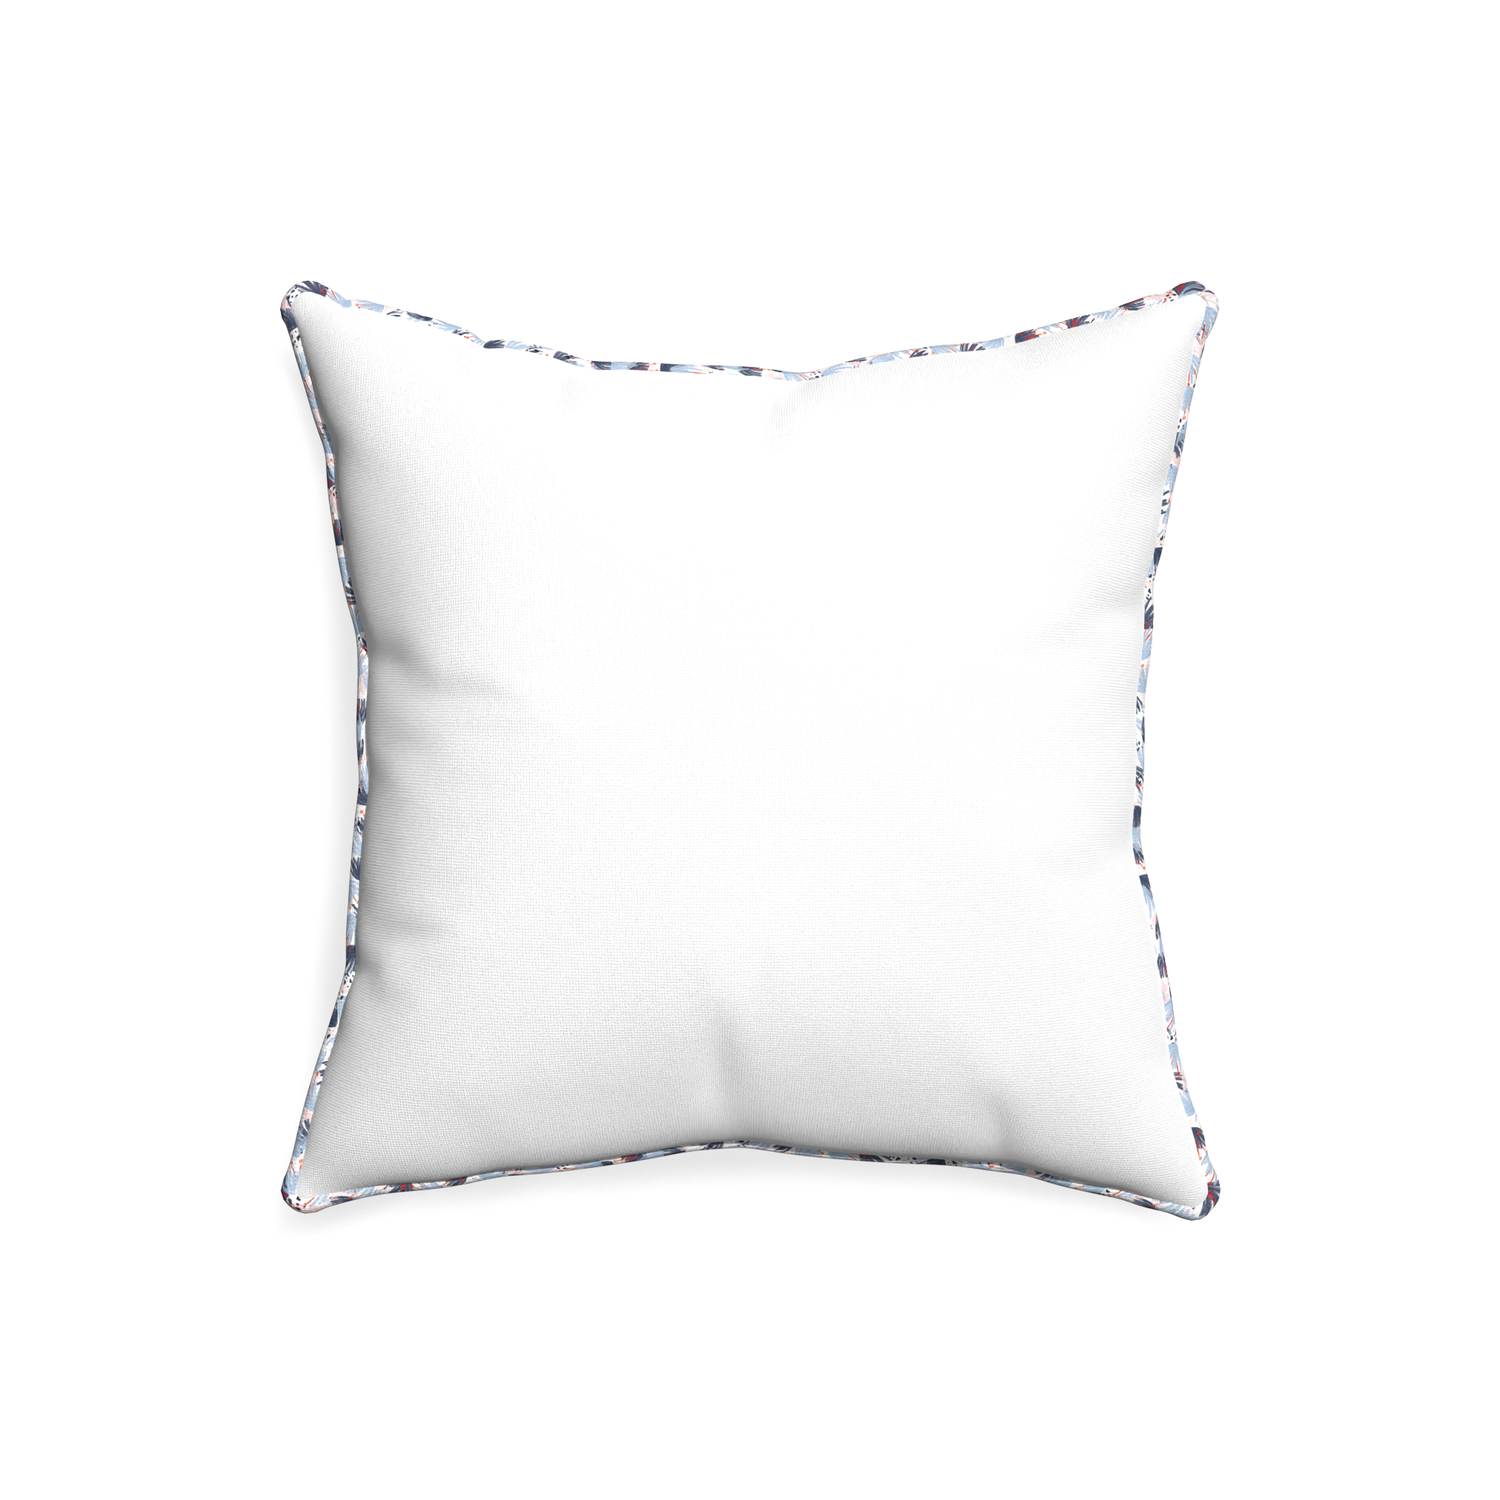 20-square snow custom pillow with e piping on white background